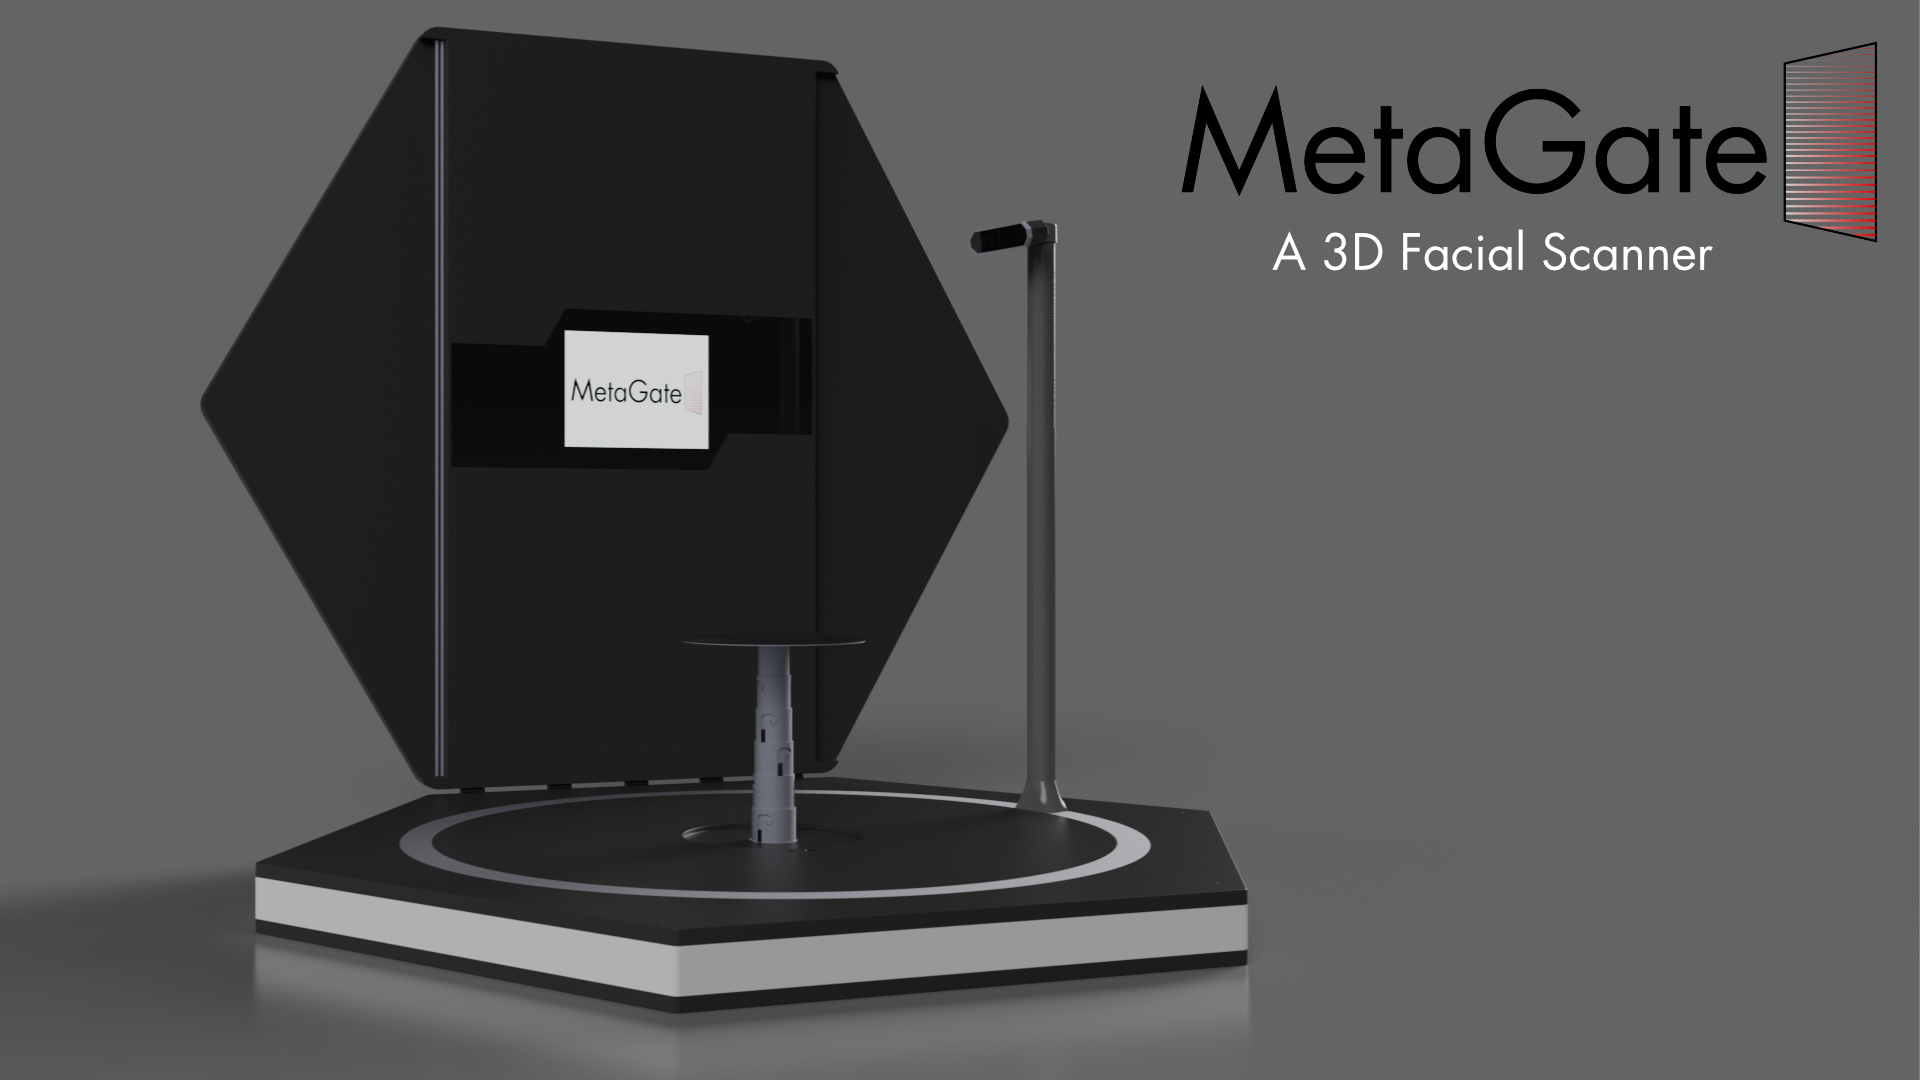 The MetaGate 3D face scanner